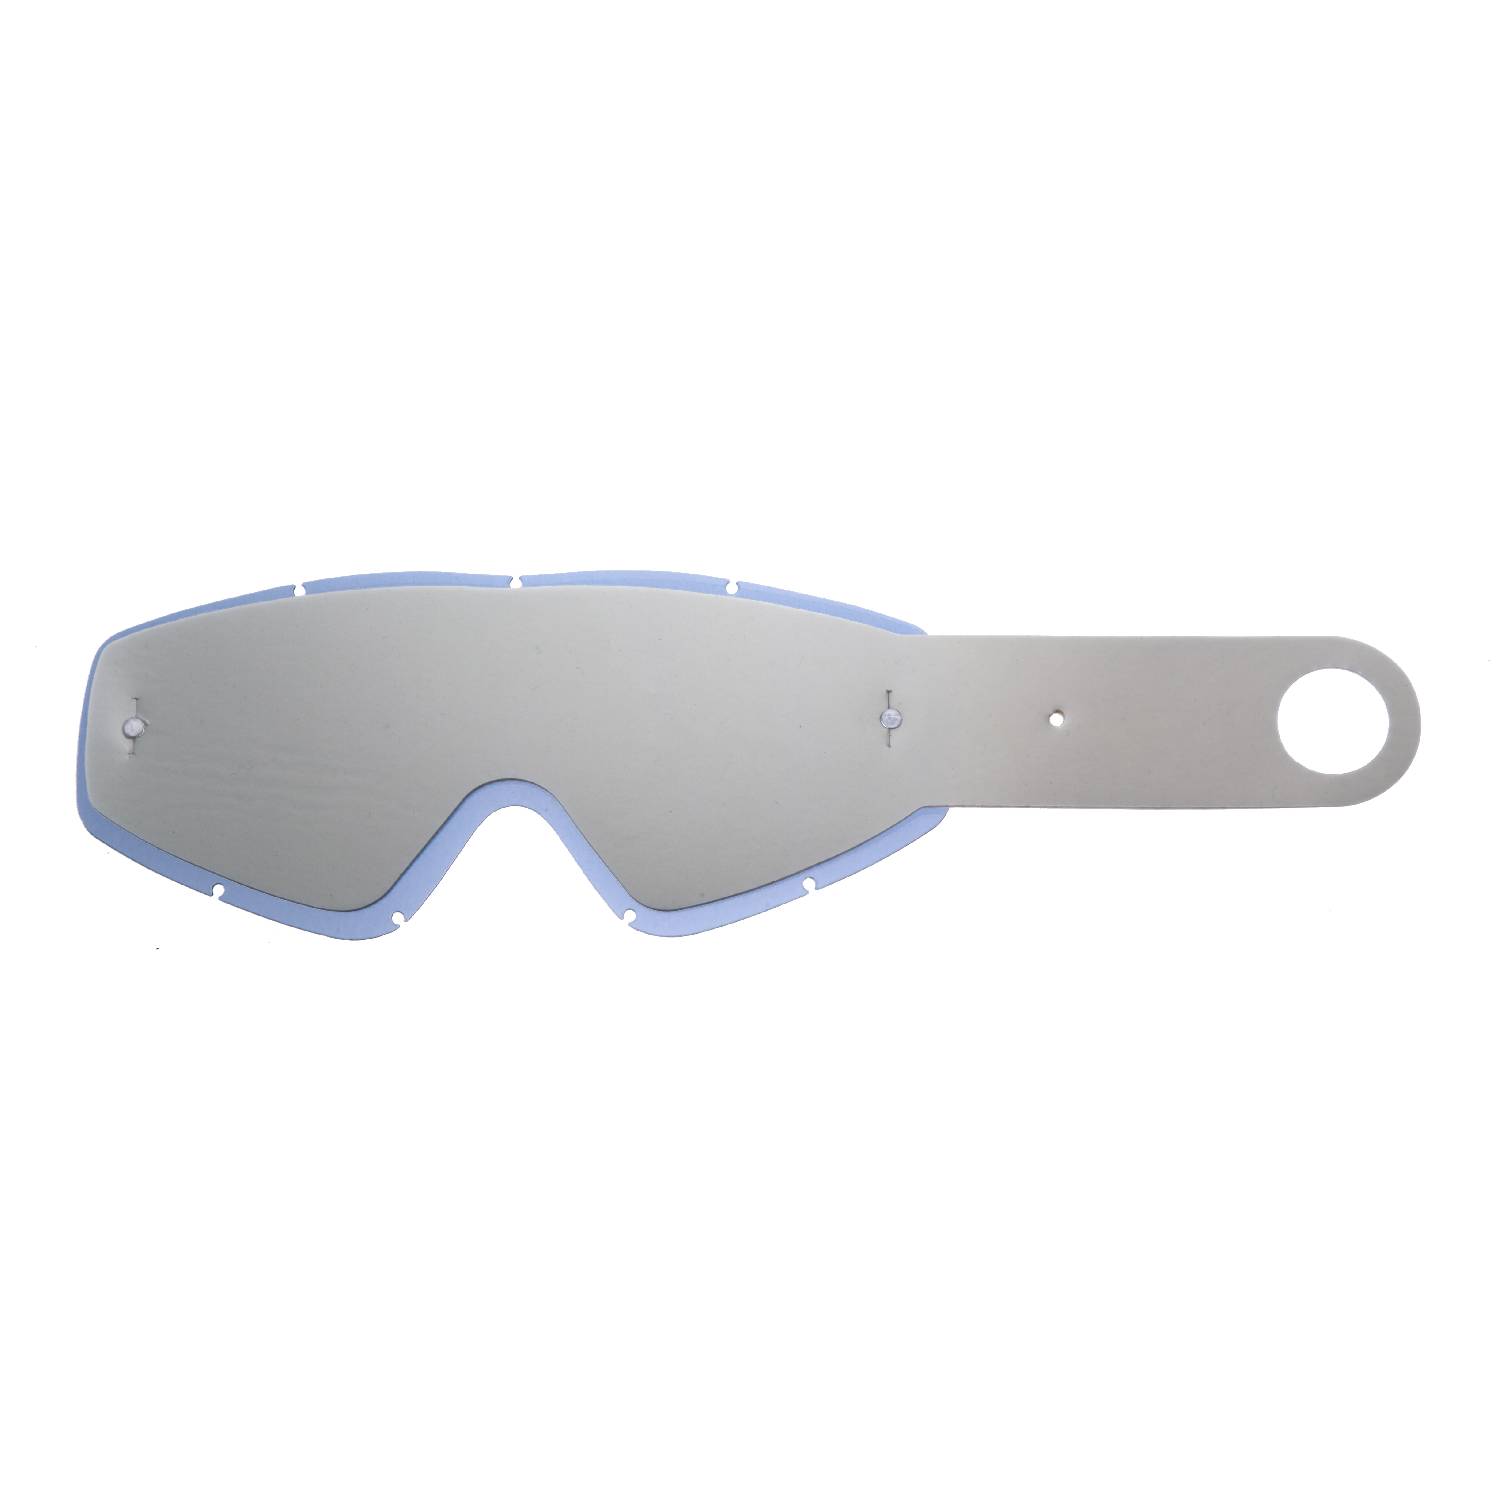 combo lenses with smokey lenses with 10 tear off compatible for Eks goggle